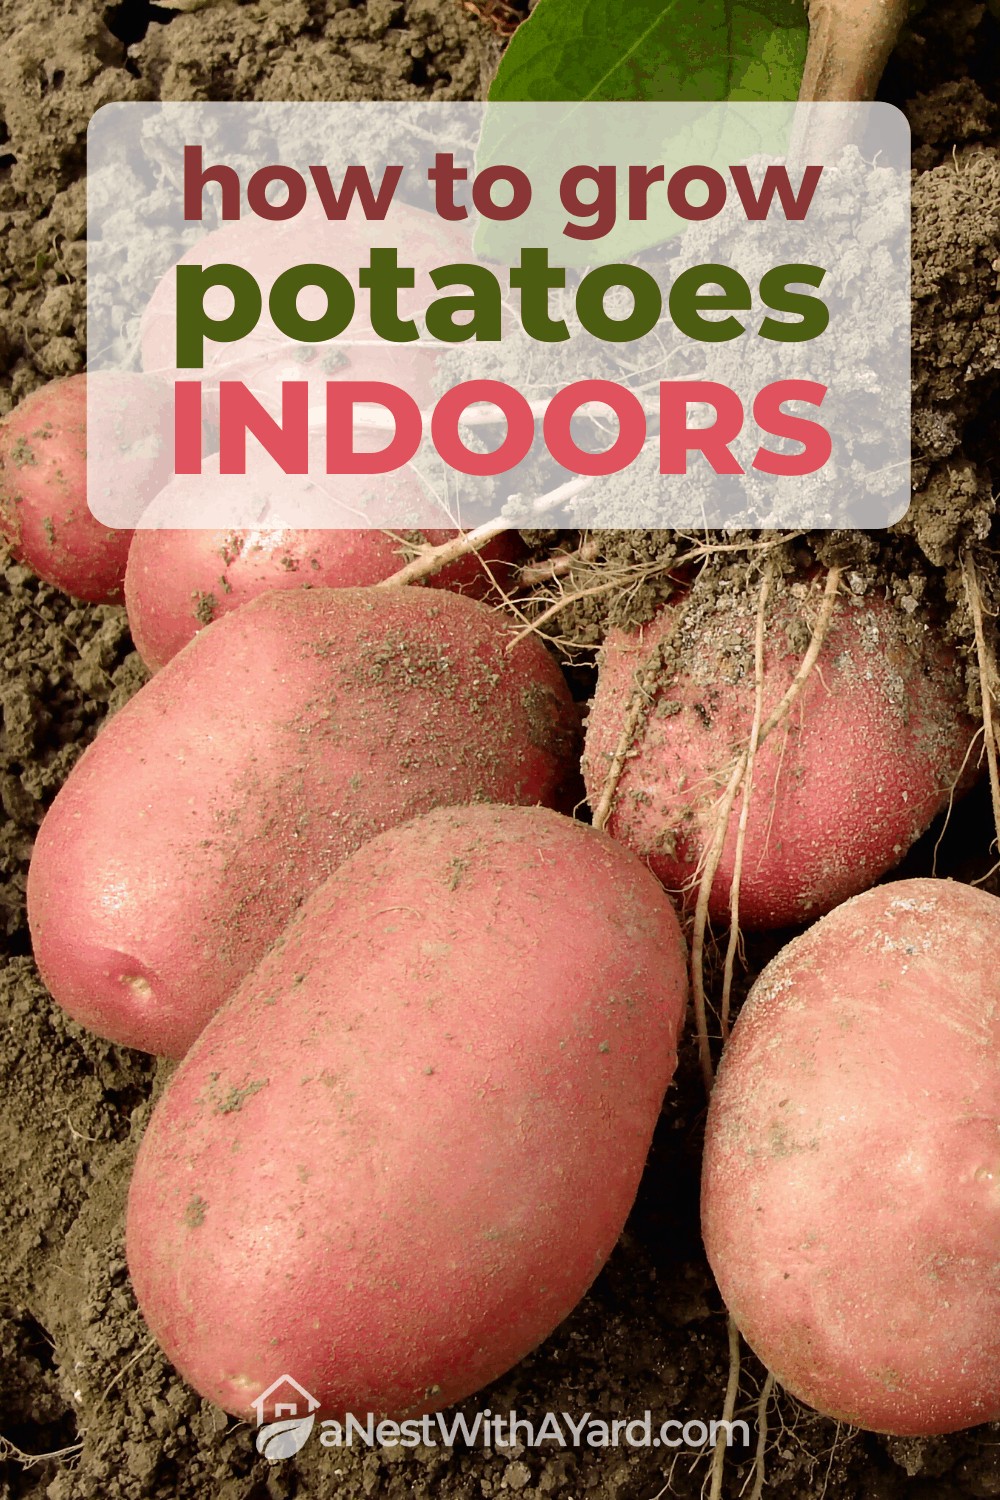 How to Grow Potato Indoors? it's easier than you might think! #indoorGarden #potatoes #gardening 